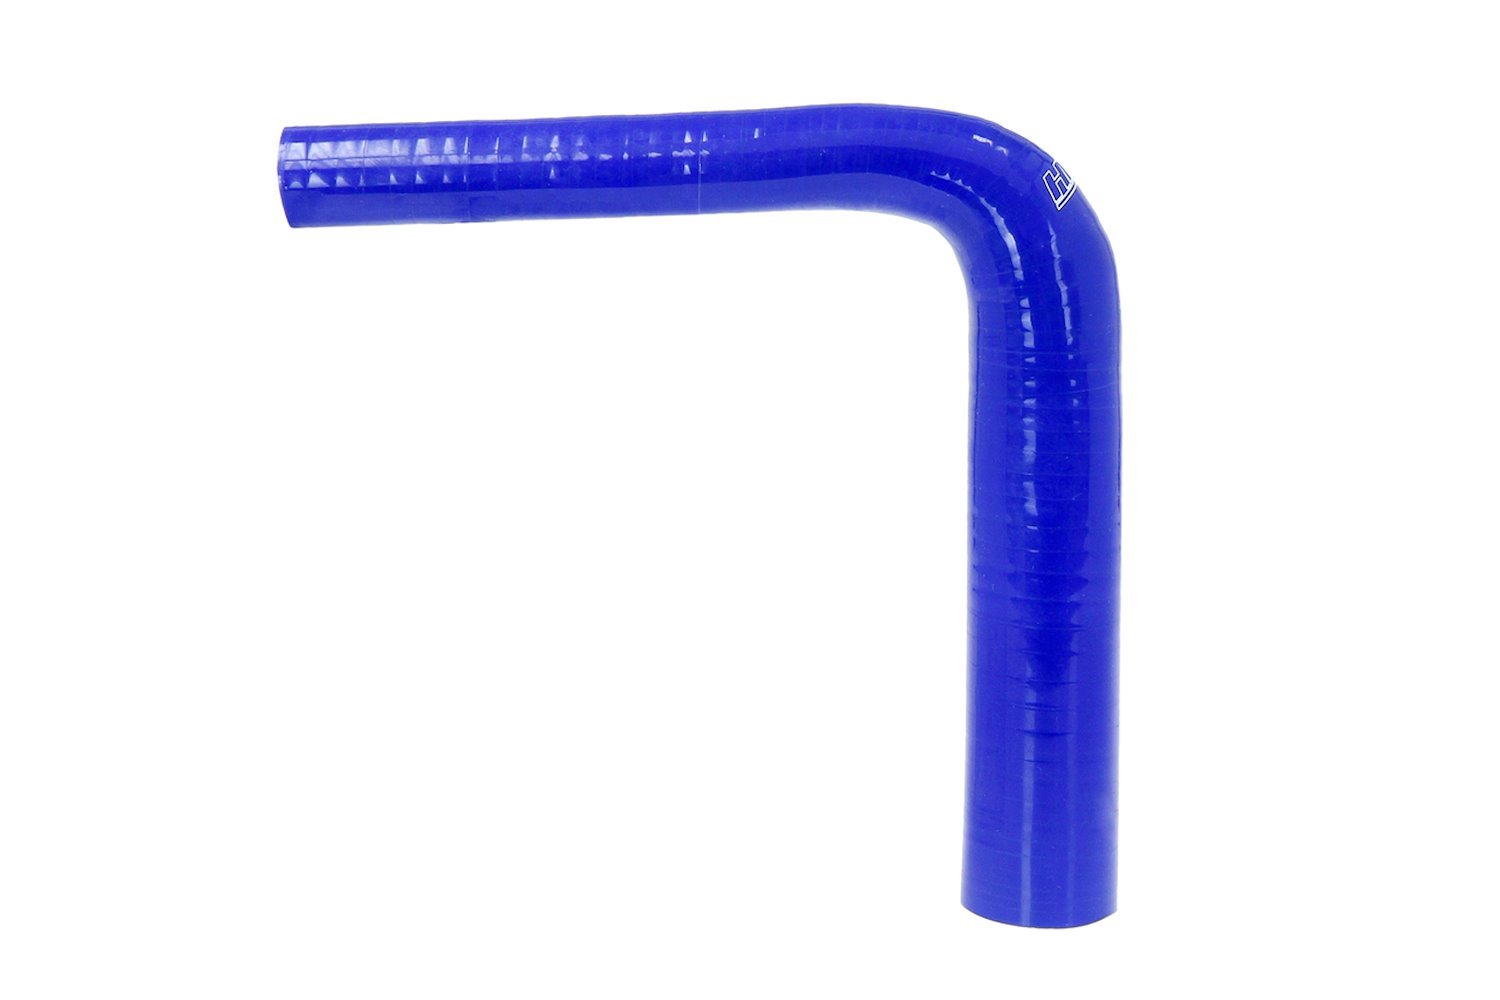 HTSER90-112-125-BLUE Silicone 90-Degree Elbow Hose, High-Temp 4-Ply Reinforced, 1-1/8 in. - 1-1/4 in. ID, Blue